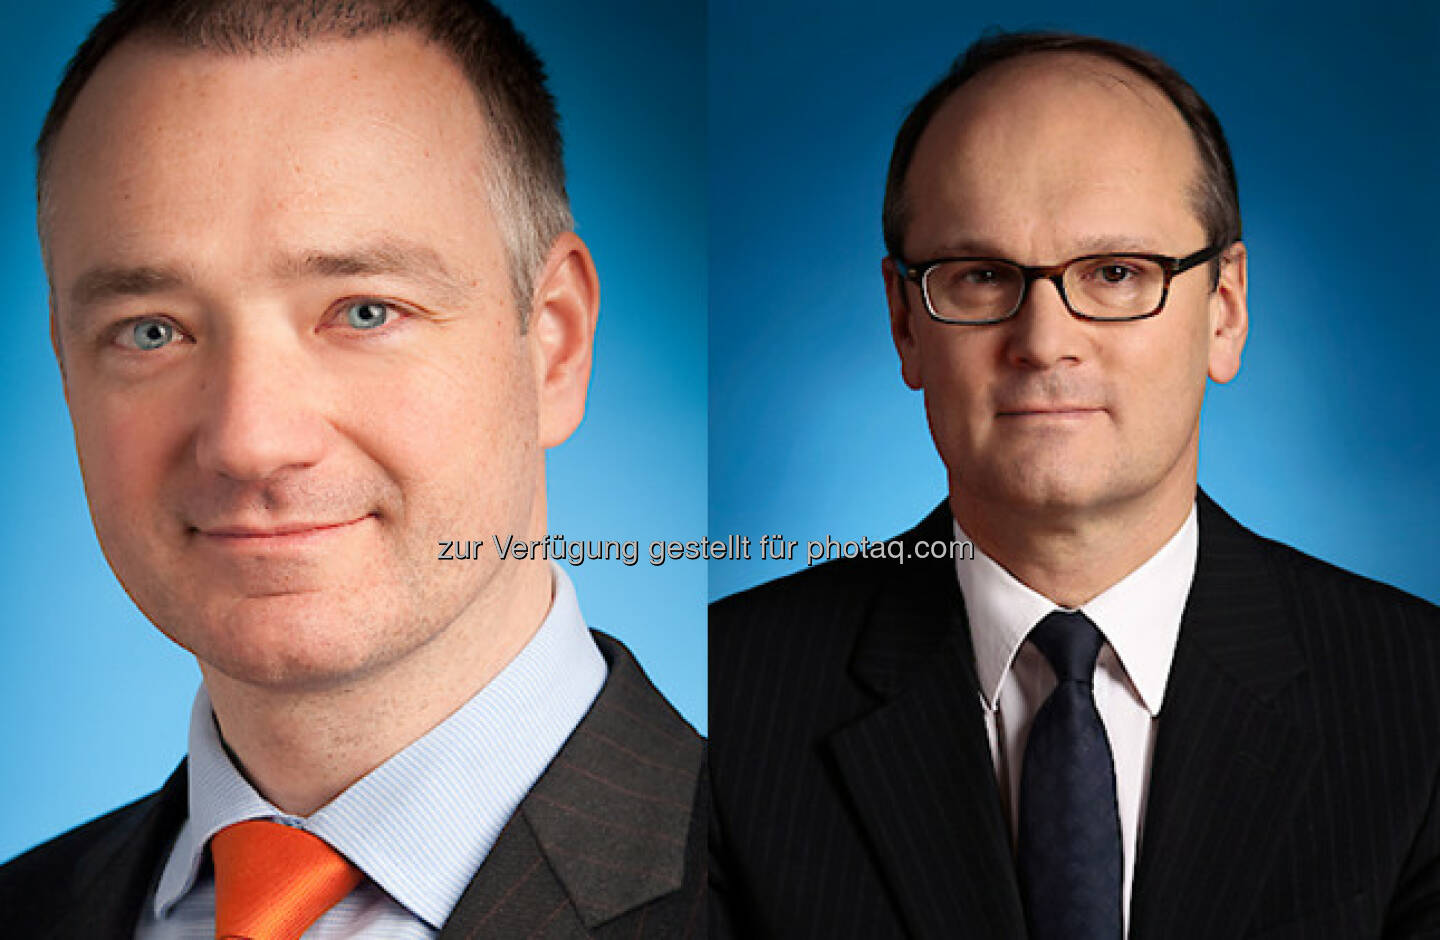 Erik Steger (Partner Wolf Theiss & Member of Management Board), Horst Ebhardt (Partner Wolf Theiss, Head of Corporate and M&A) : FT ranks Wolf Theiss as one of the most innovative law firms in Europe : Fotocredit: WT